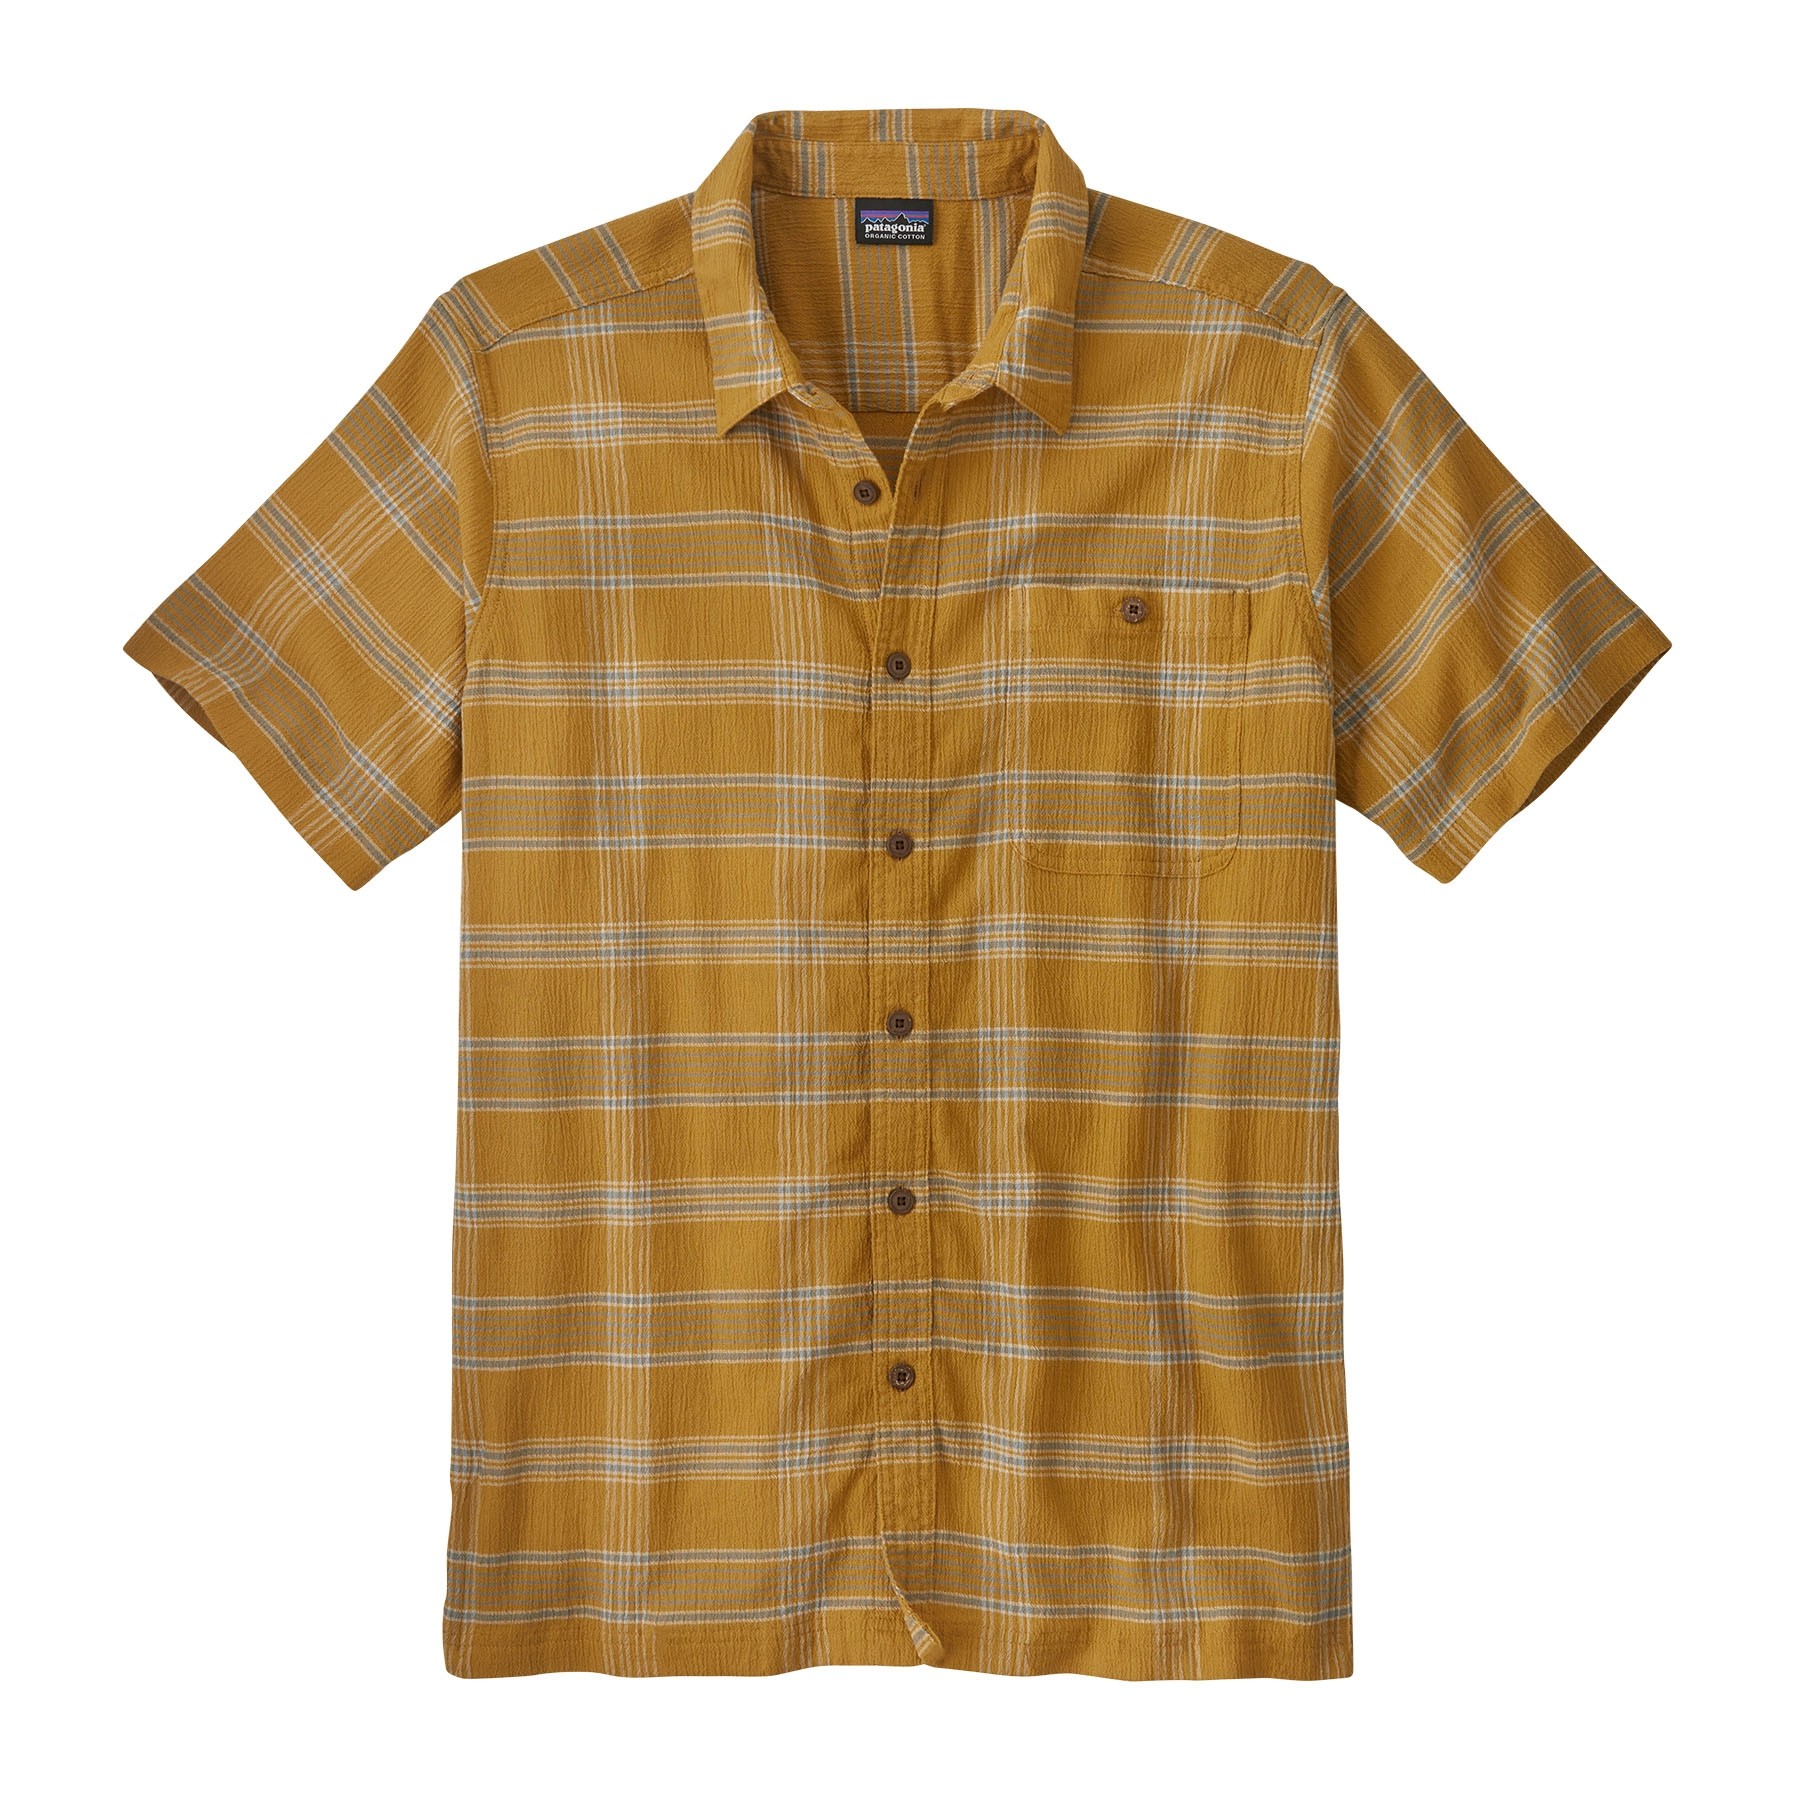 Patagonia Men's A/C® Shirt : Paint Plaid:  Discovery: Pufferfish Gold